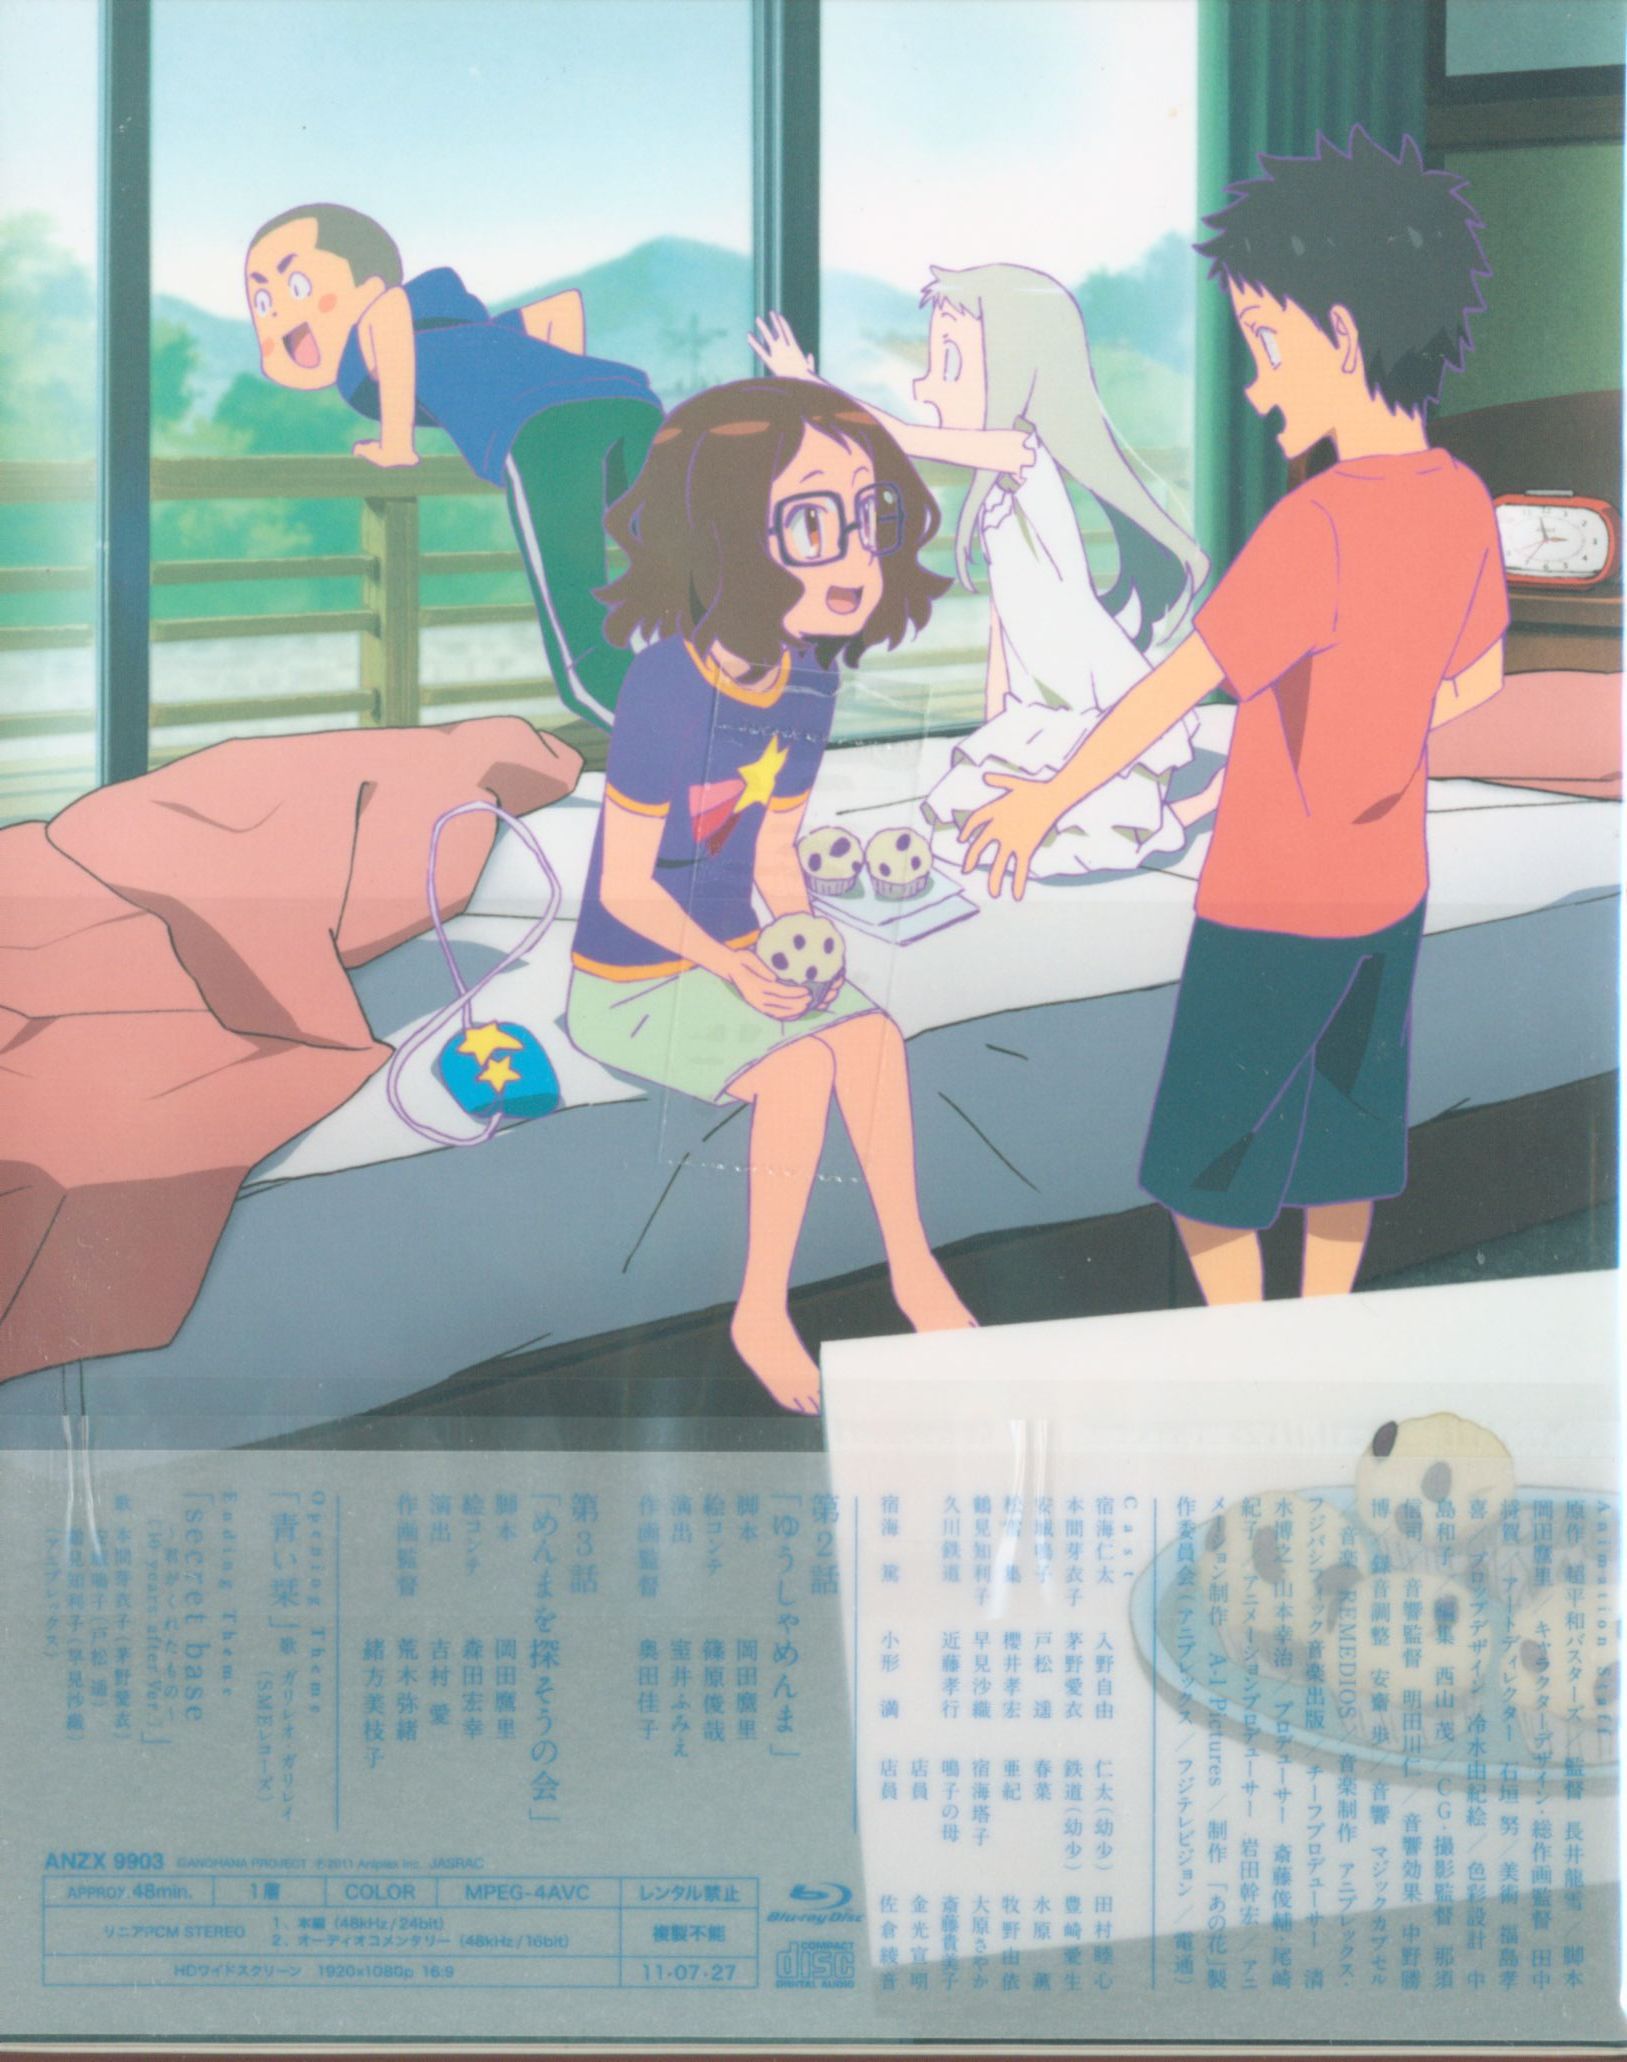 Aniplex Anime Blu Ray Limited Edition The Name Of The Flower Saw That Day We Still Do Not Know 2 Mandarake 在线商店